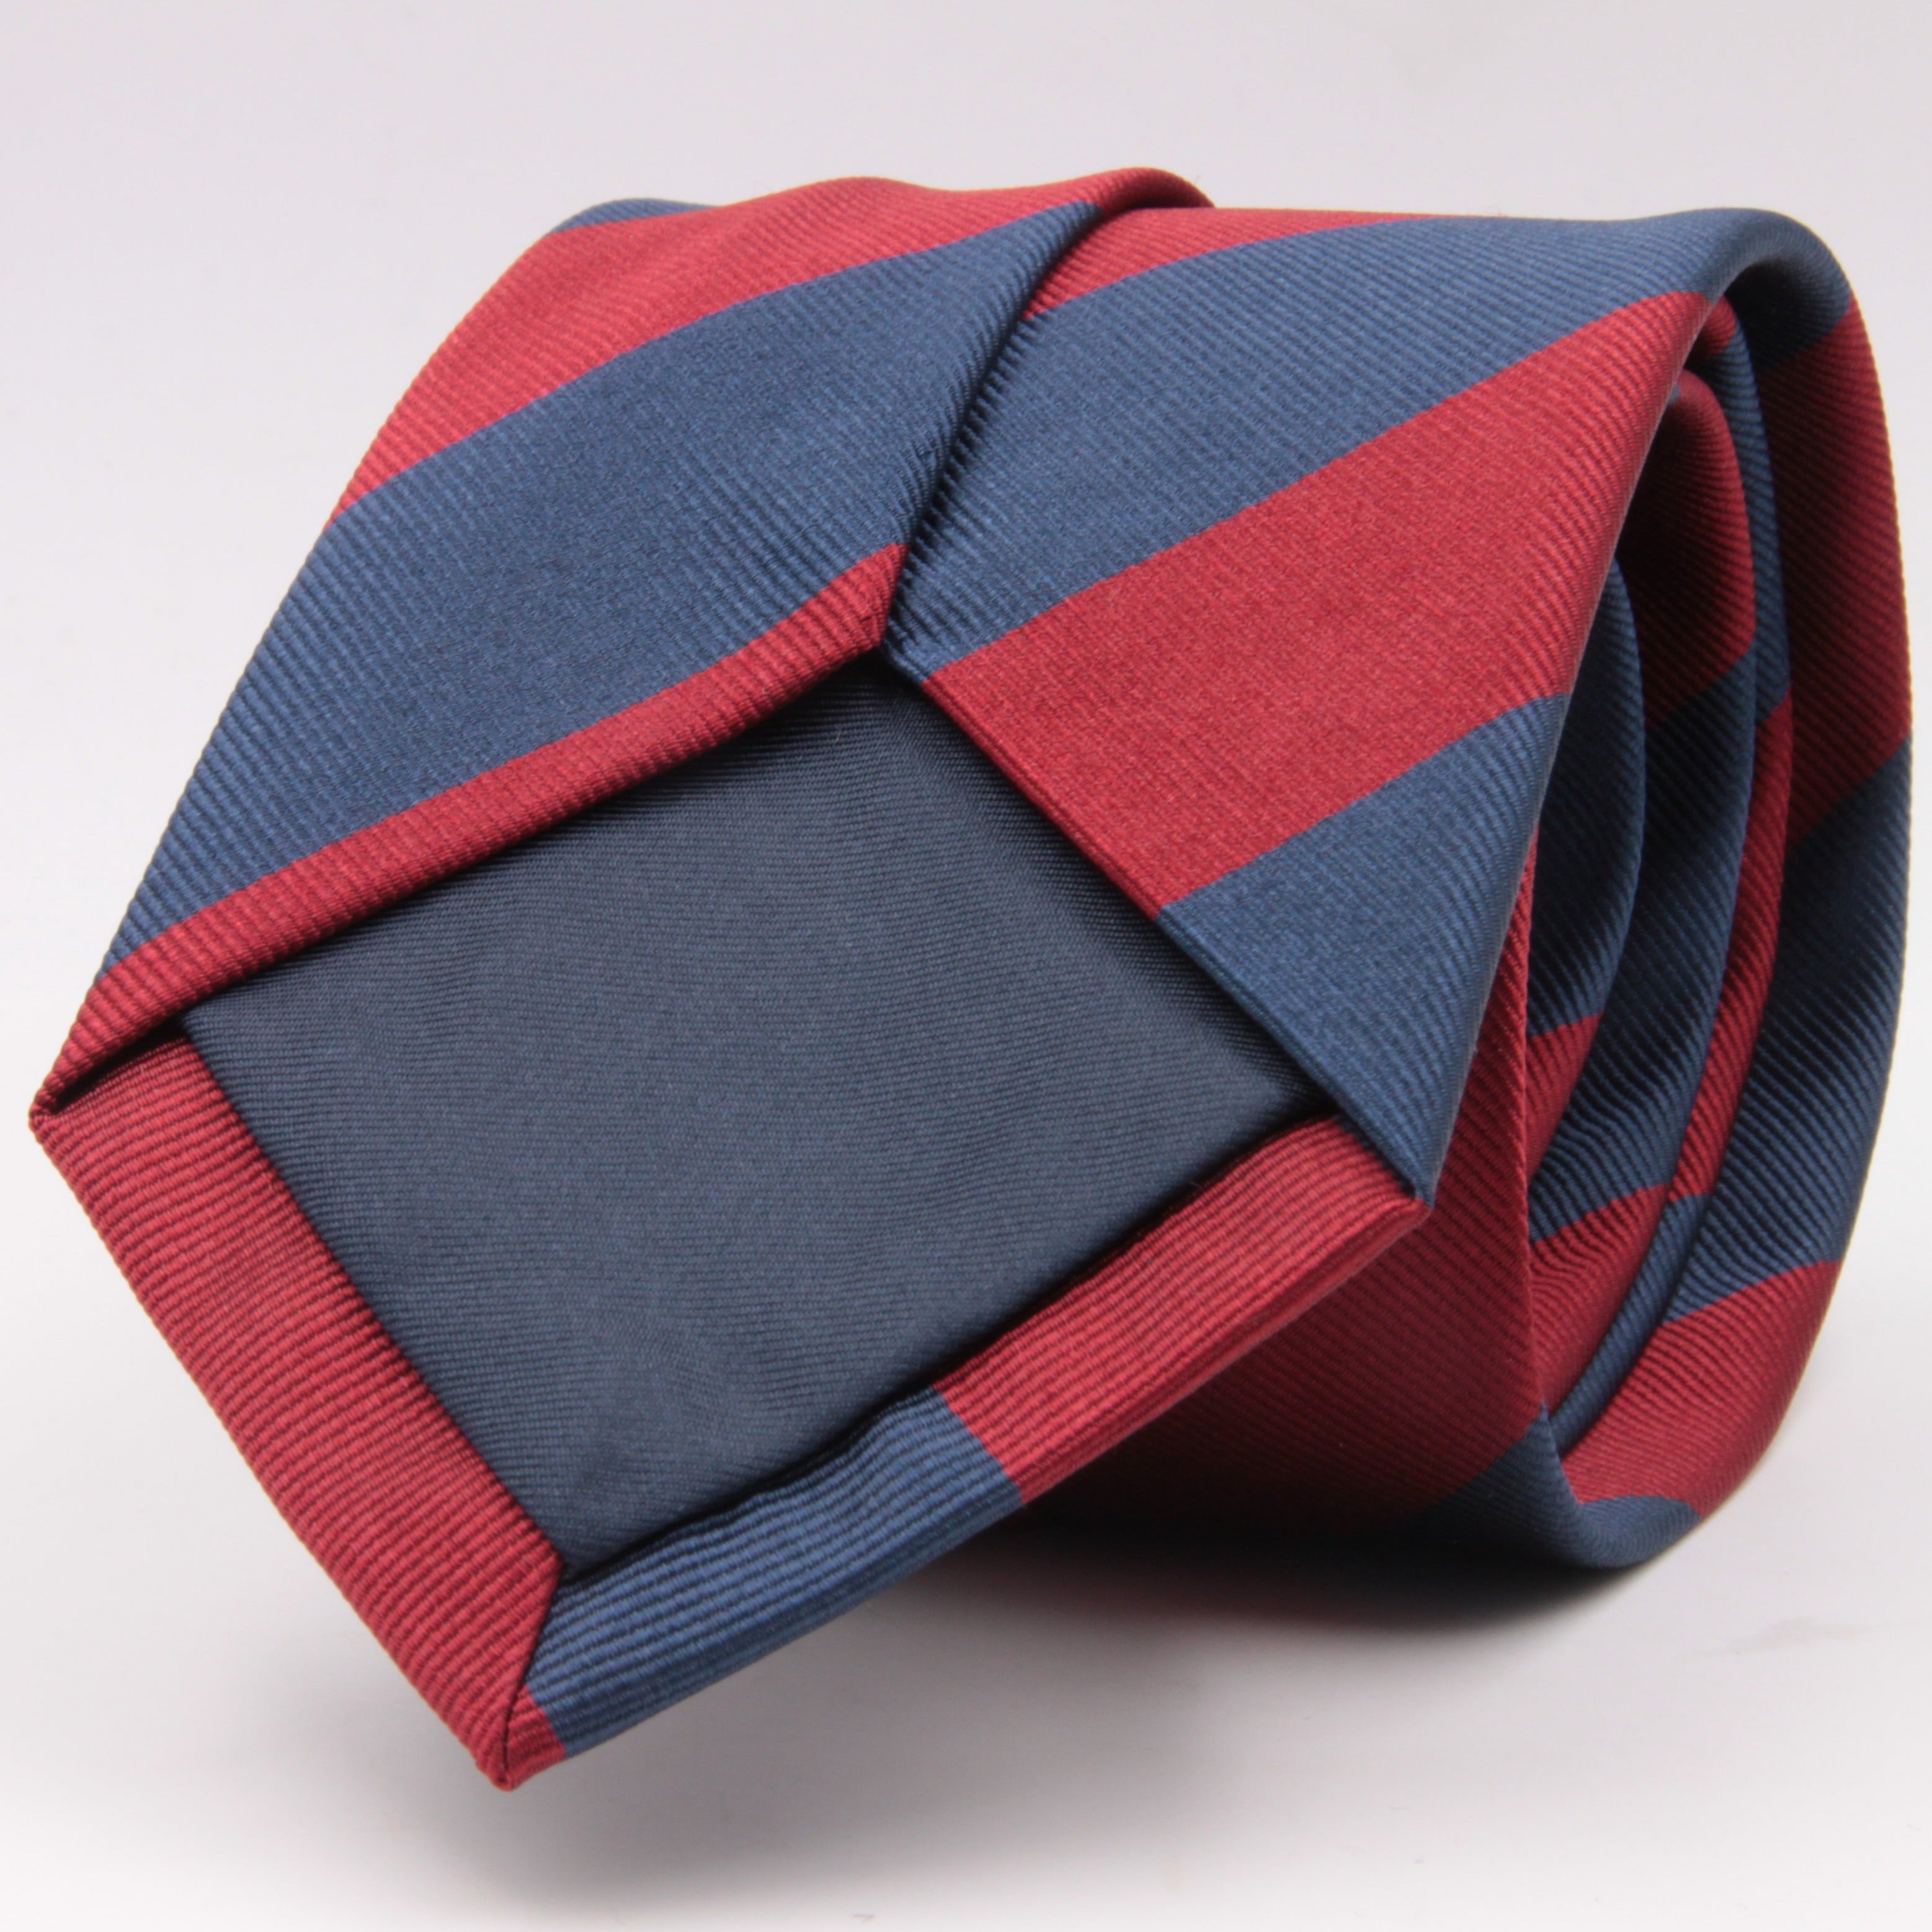 Holliday & Brown for Cruciani & Bella 100% Silk Jacquard  Regimental "Sidney Sussex College" Blue and Red stripes tie Handmade in Italy 8 cm x 150 cm #5123